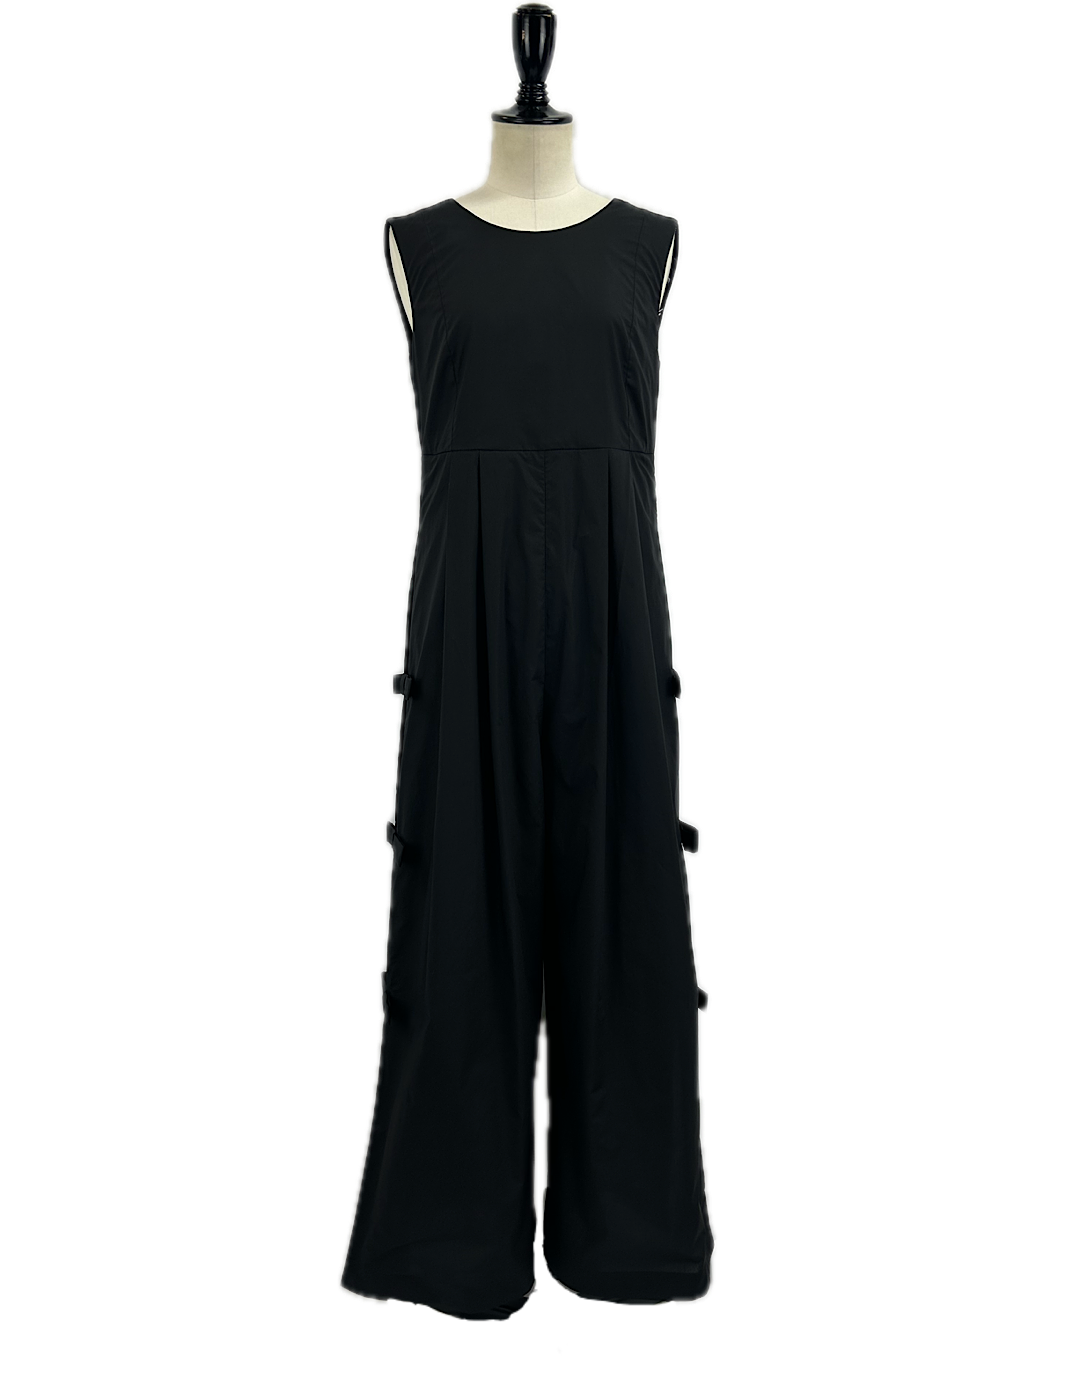 <img class='new_mark_img1' src='https://img.shop-pro.jp/img/new/icons6.gif' style='border:none;display:inline;margin:0px;padding:0px;width:auto;' />MEIMEIJ / RIBBON JUMPSUIT